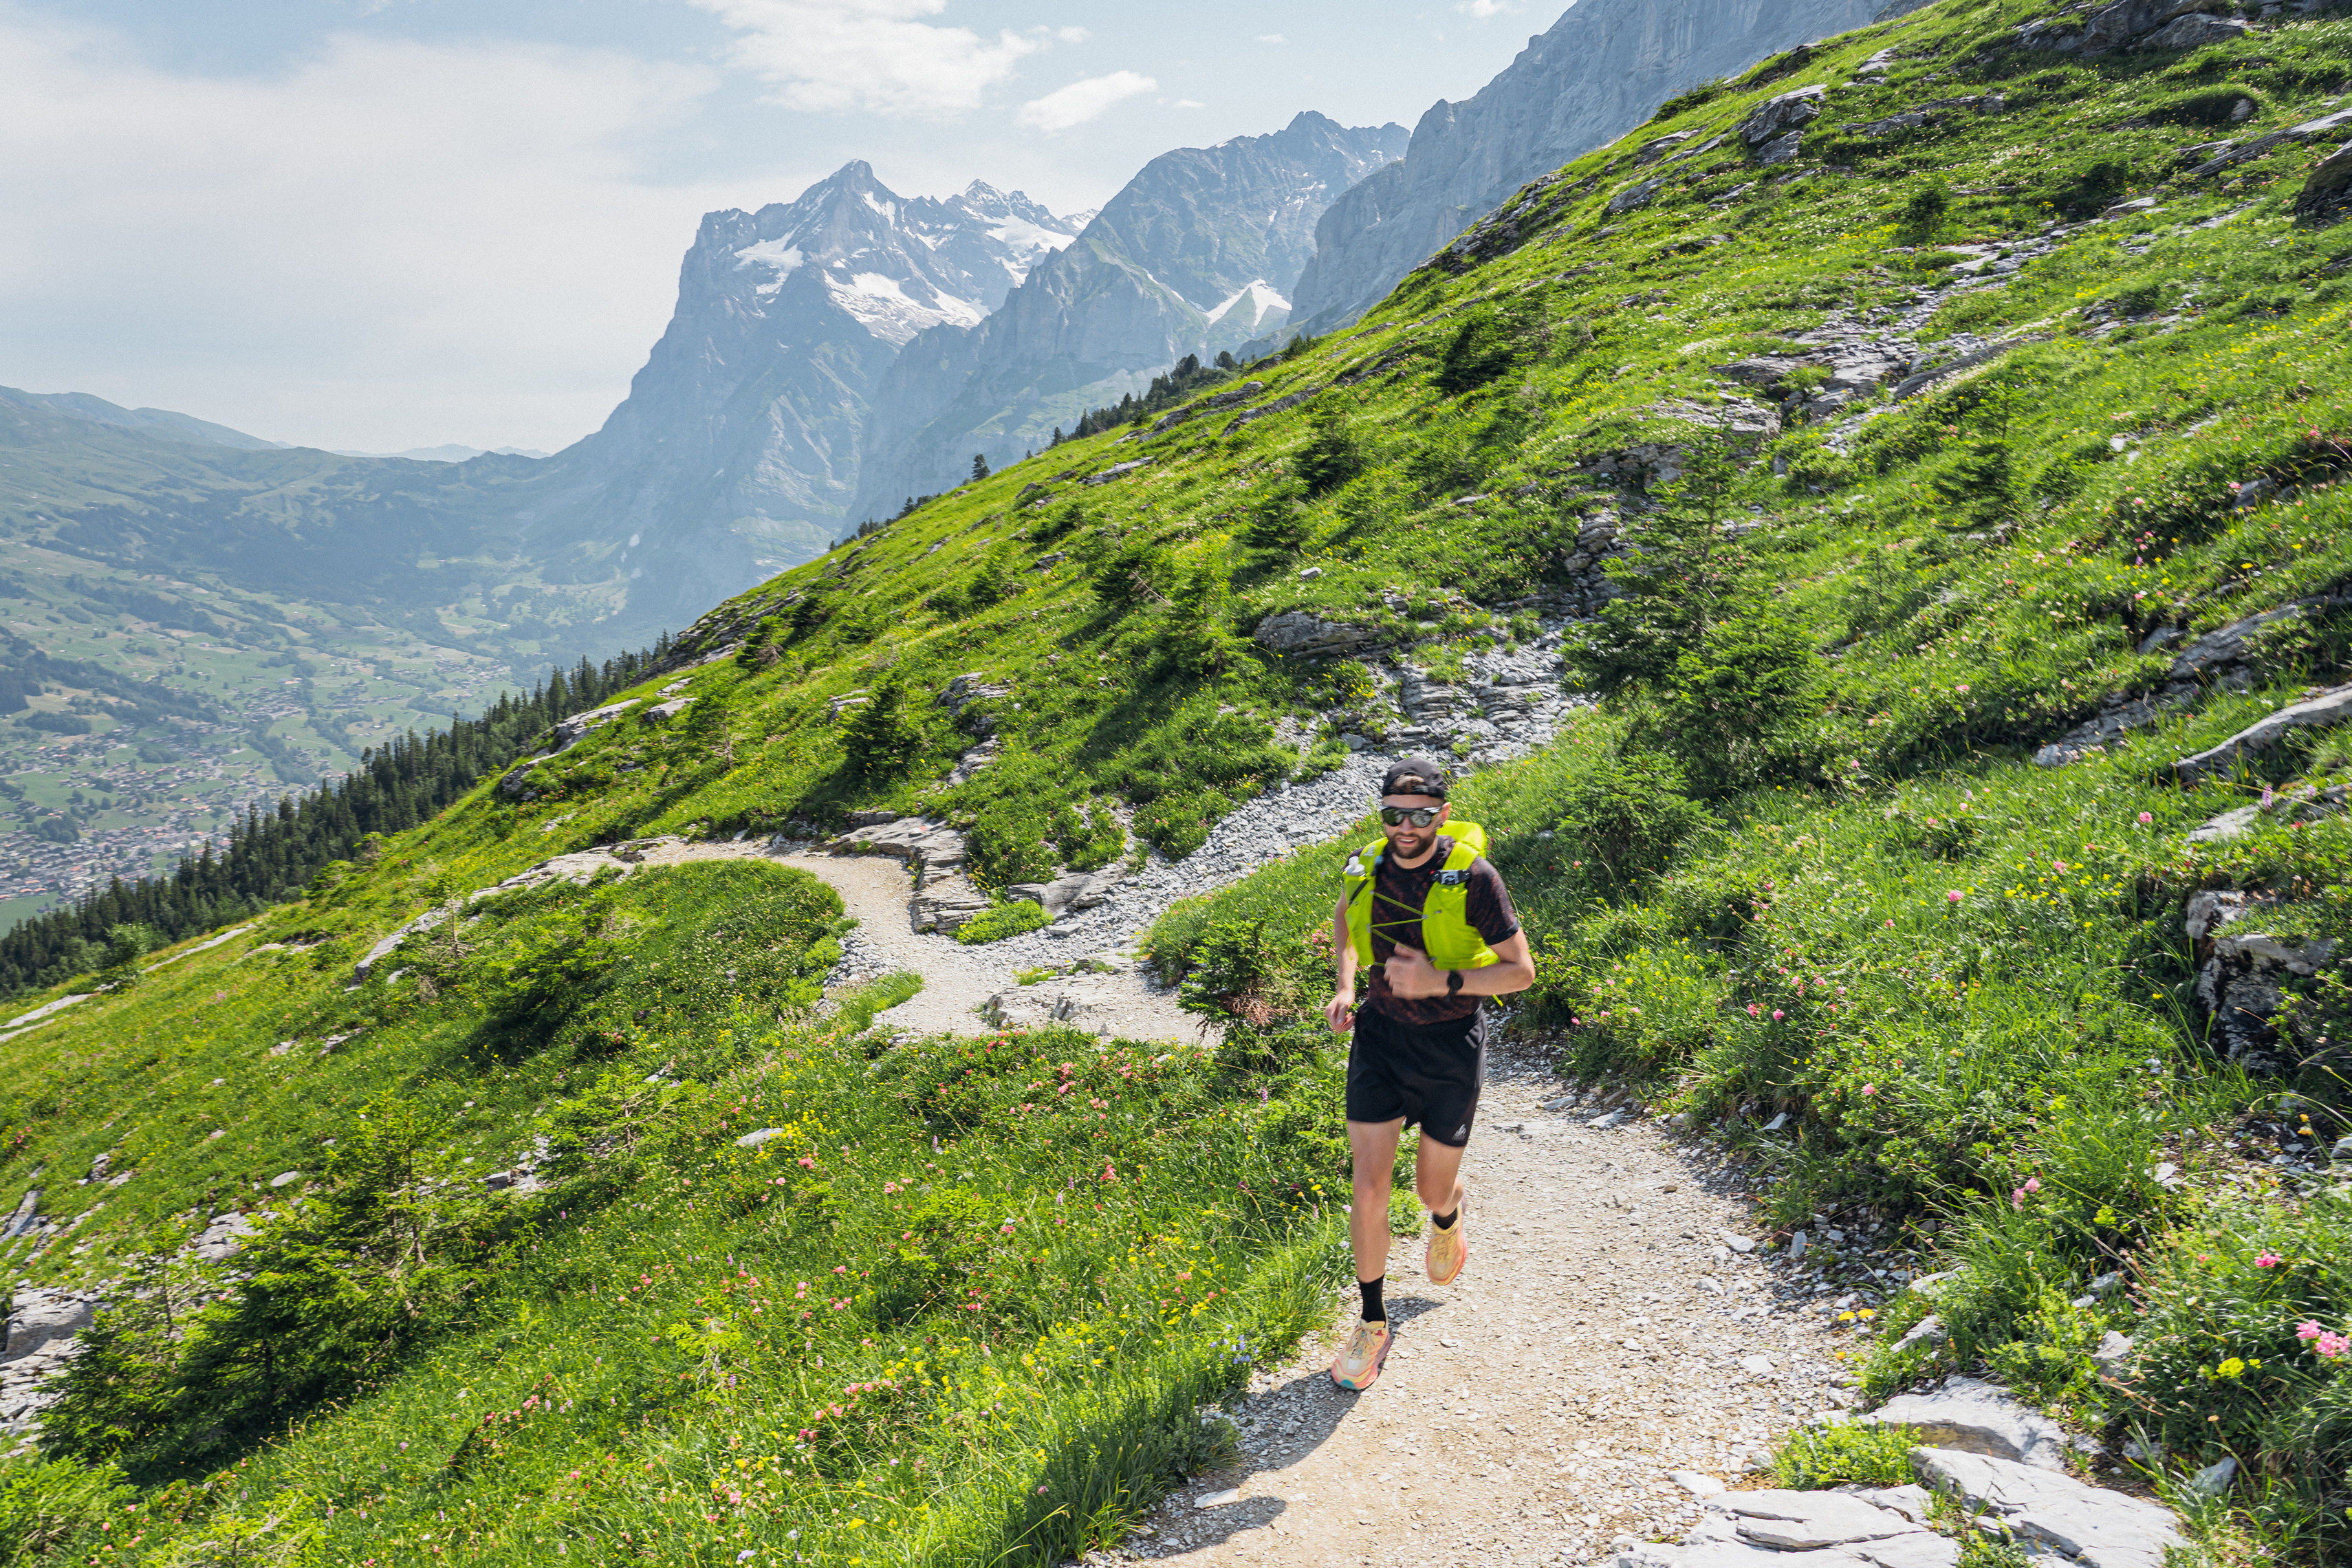 Jake Catterall running along a path along the side of a mountain in Switzerland